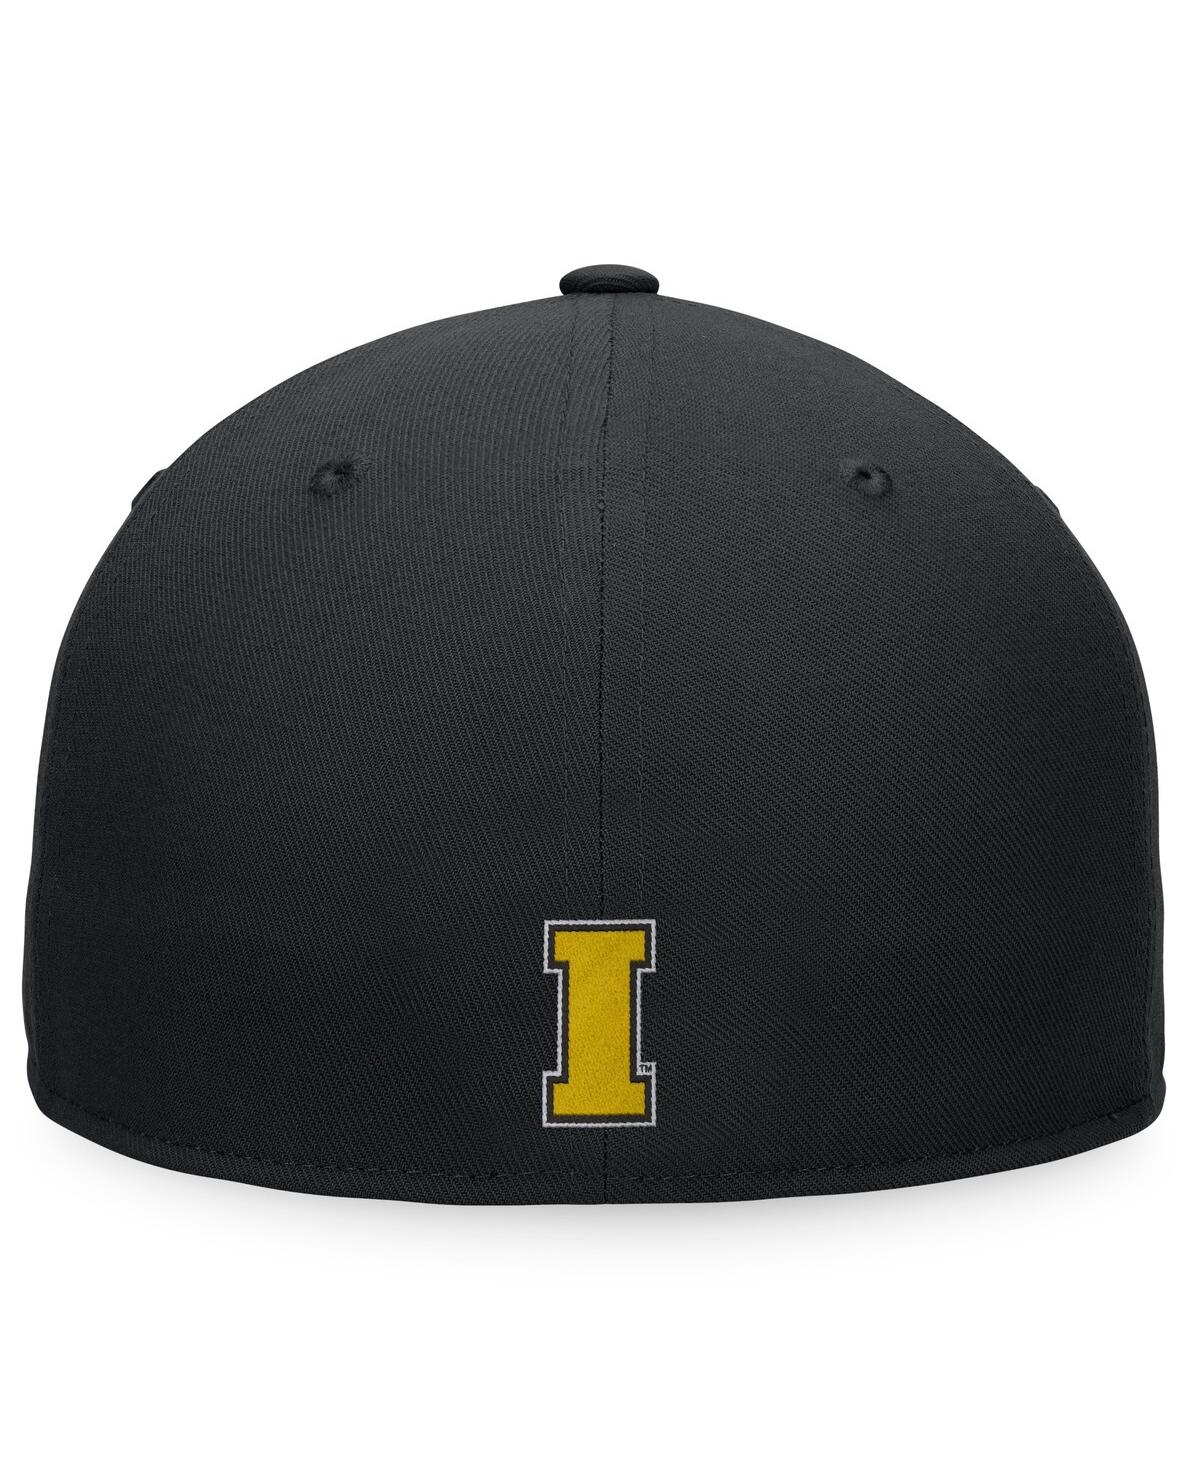 Shop Top Of The World Men's  Black Iowa Hawkeyes Fitted Hat